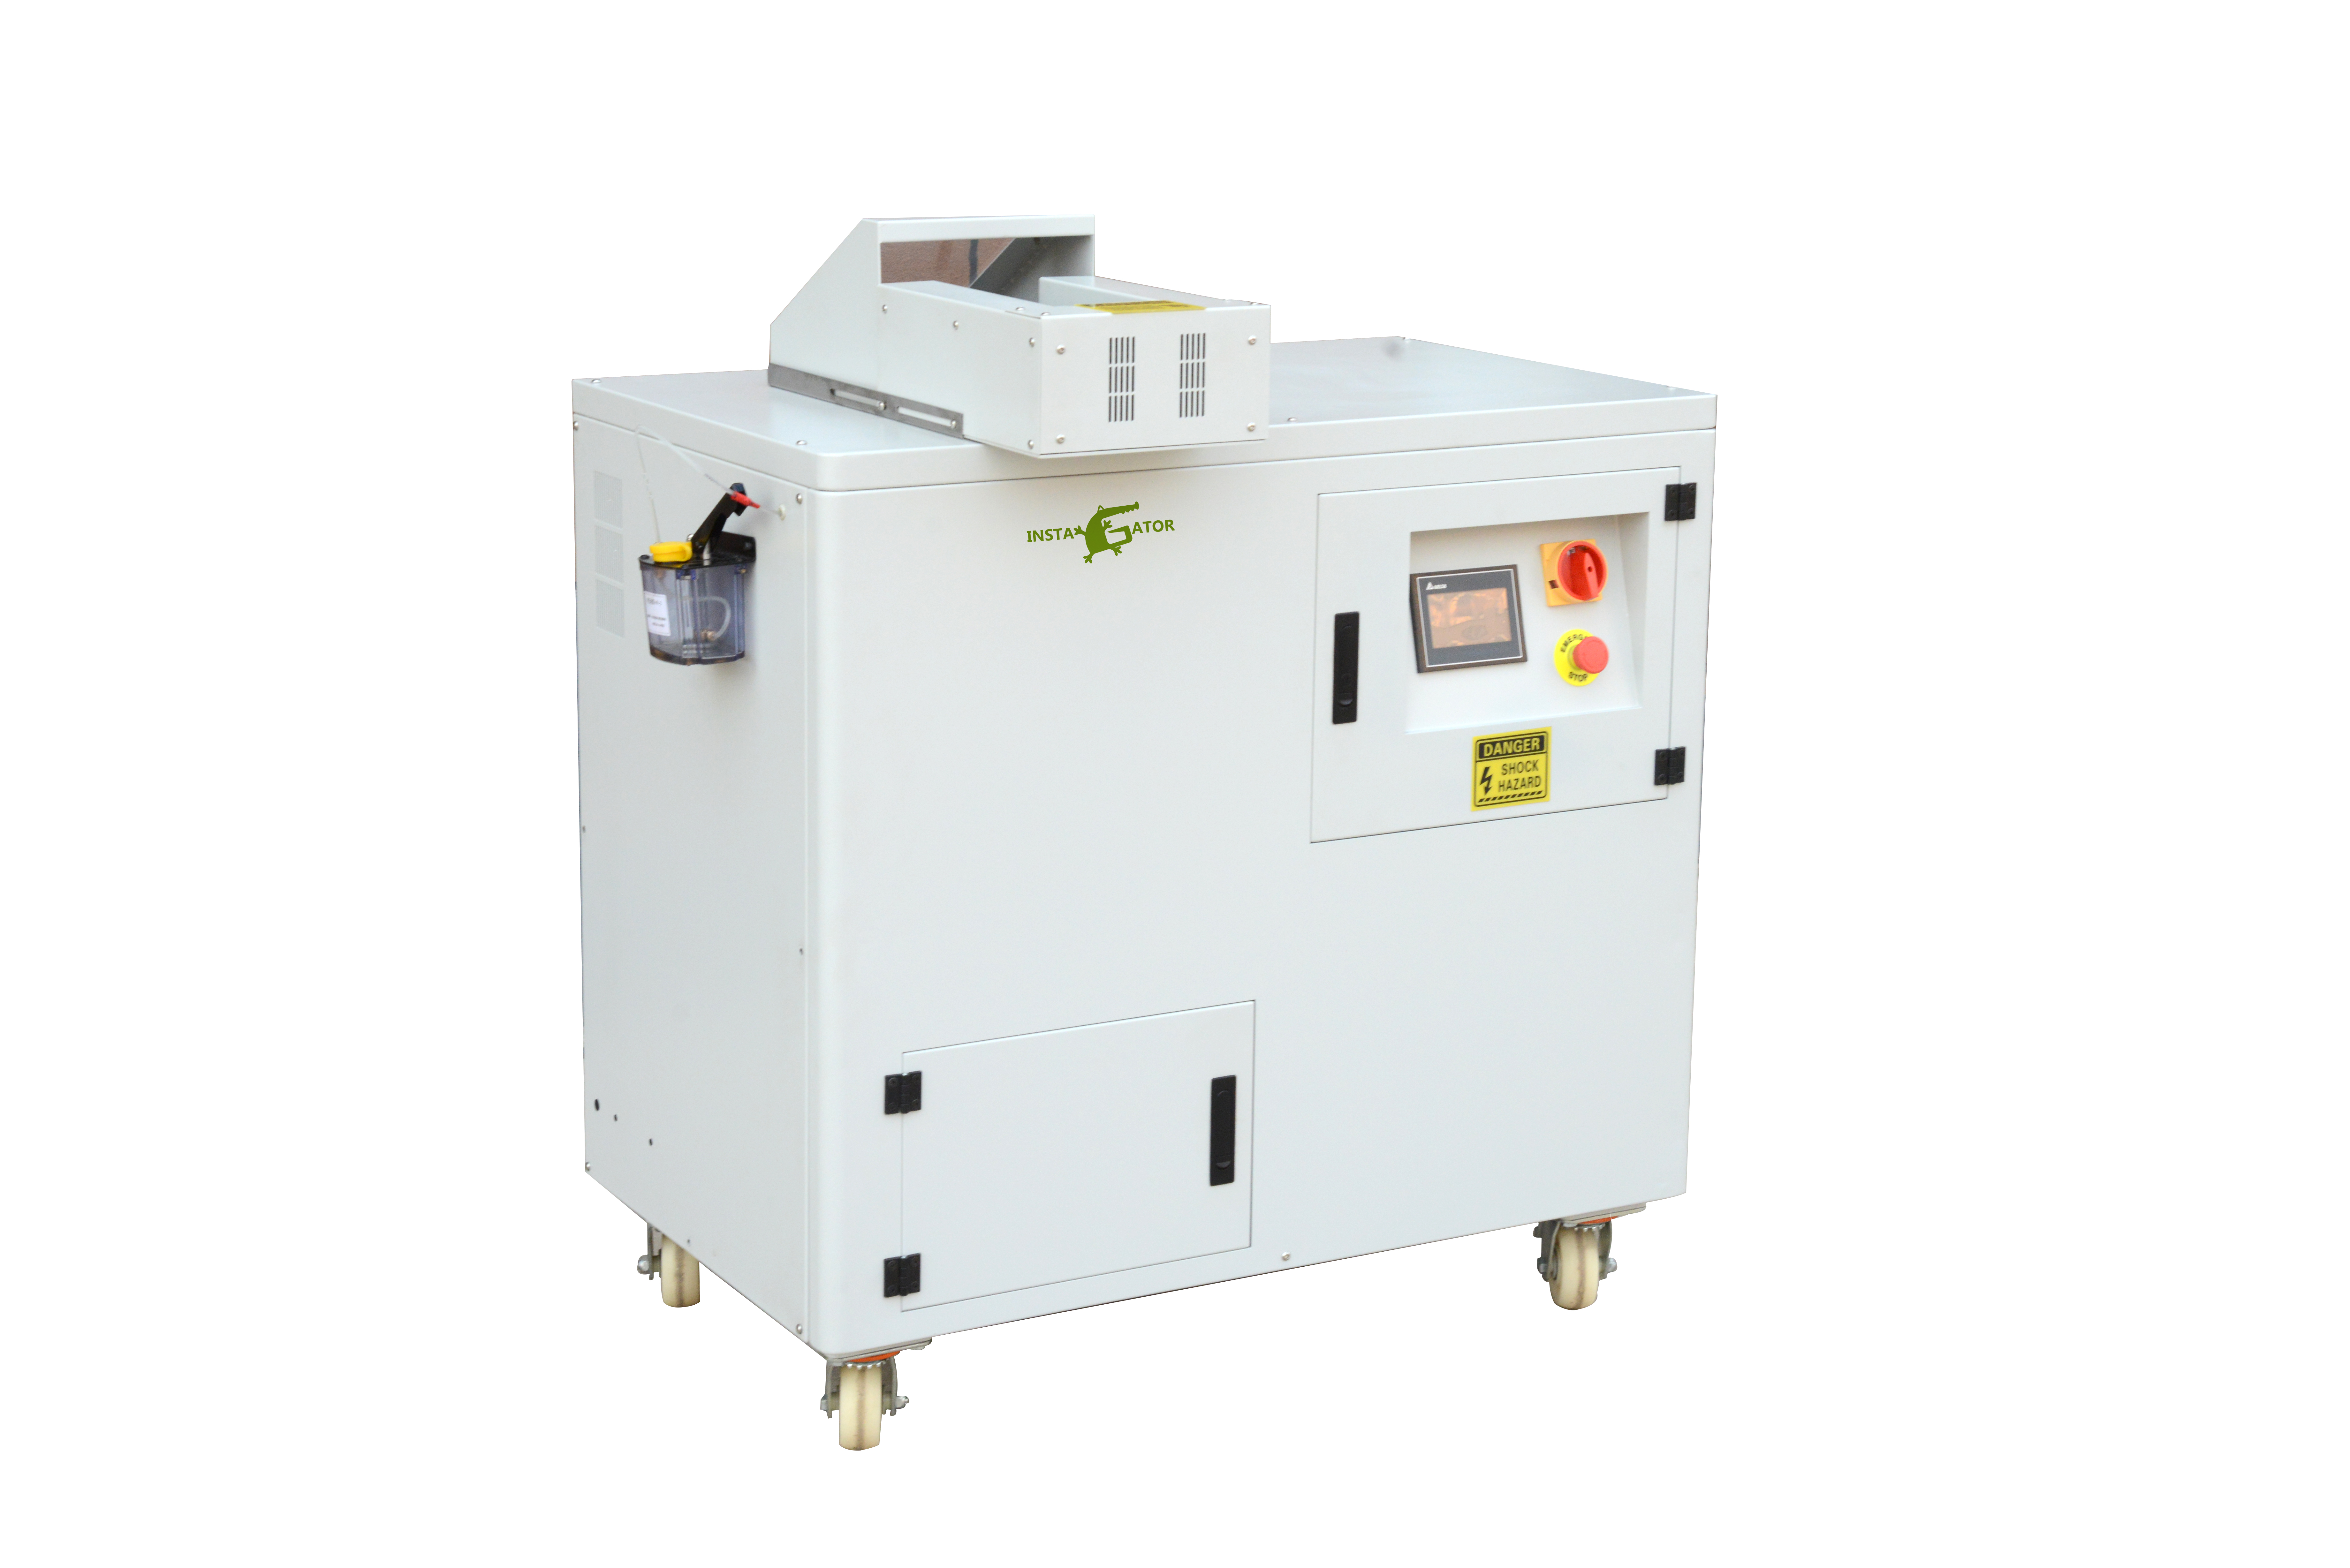 Hard Drive Solid State Drive Shredding And Recycling Machine